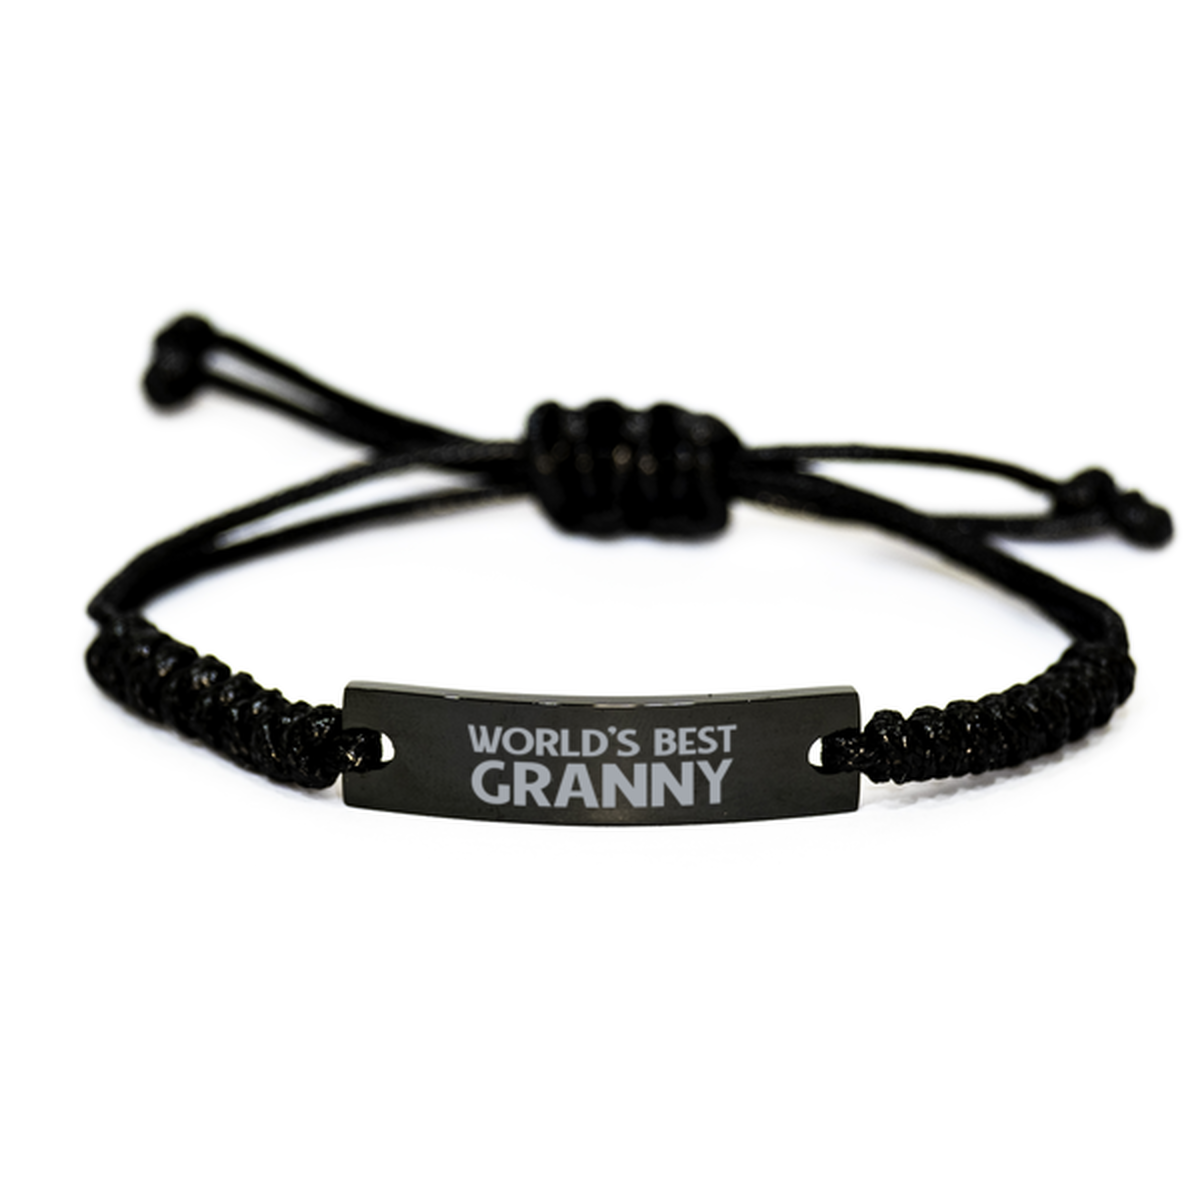 World's Best Granny Gifts, Funny Engraved Rope Bracelet For Granny, Birthday Family Gifts For Women